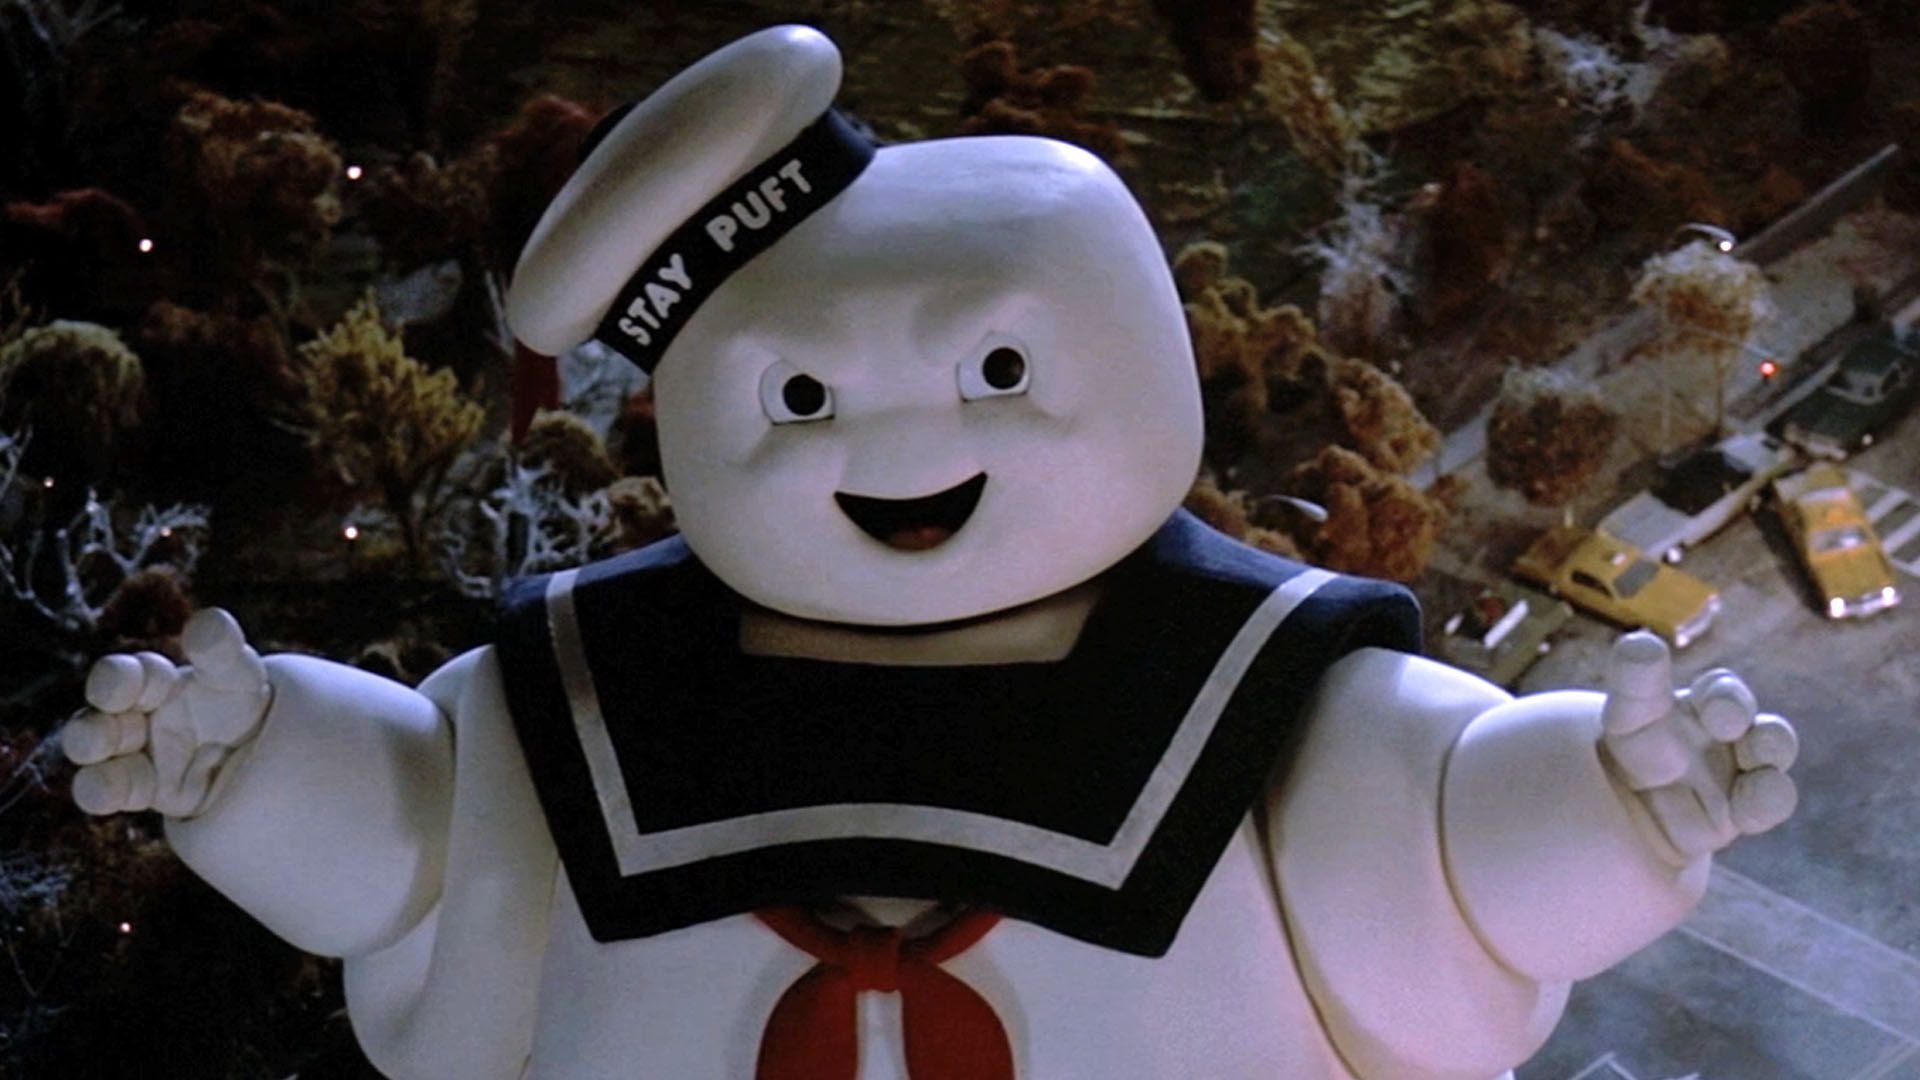 Stay Puft Marshmallow Man from Ghostbusters